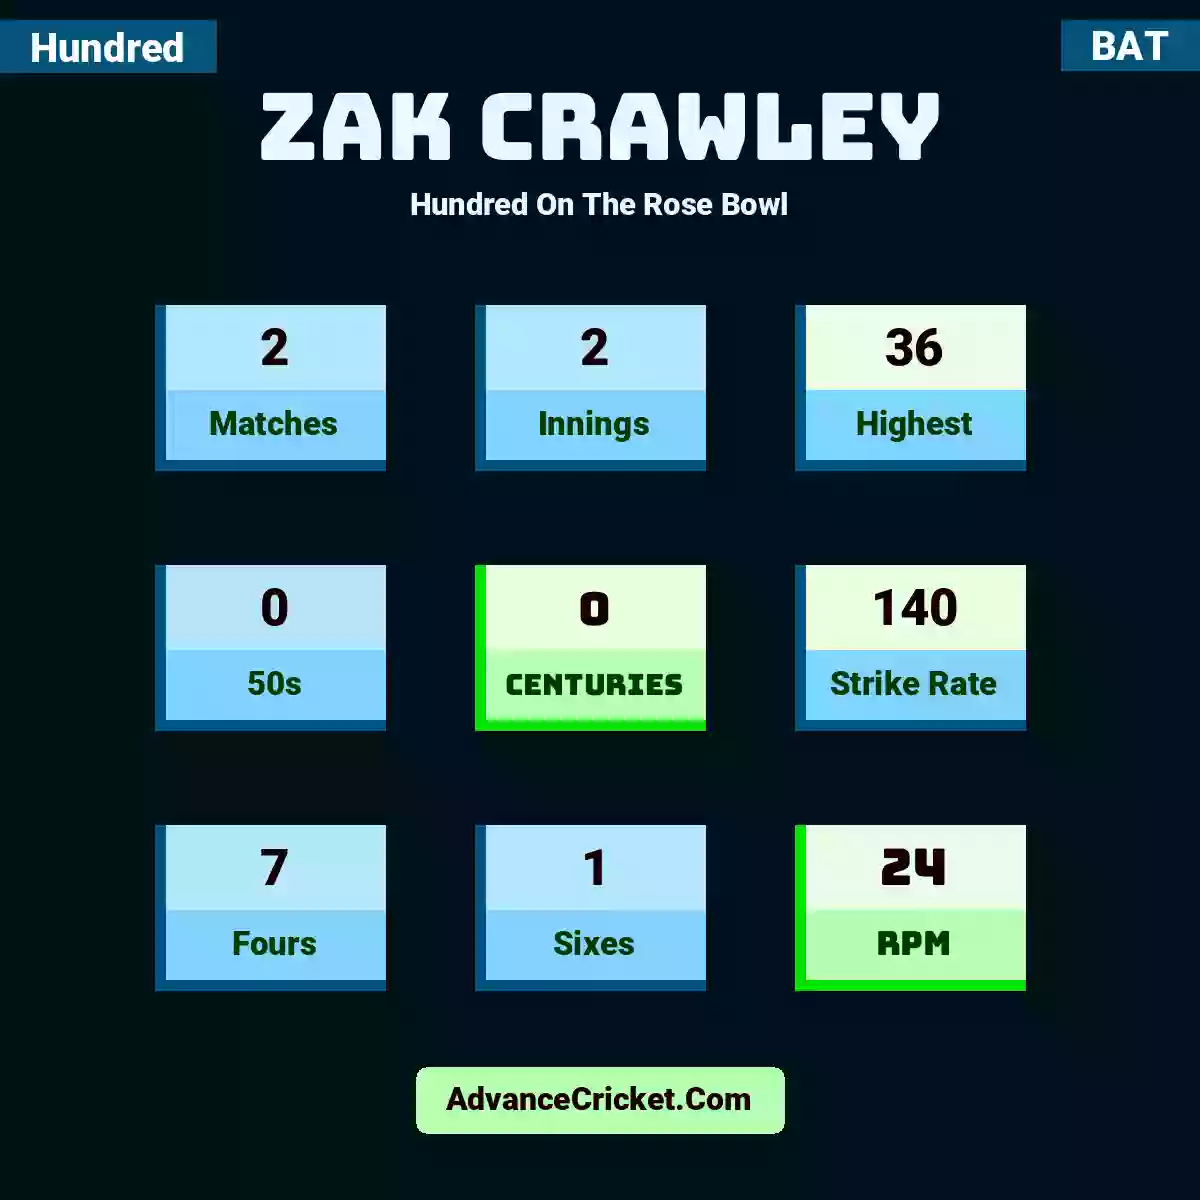 Zak Crawley Hundred  On The Rose Bowl, Zak Crawley played 2 matches, scored 36 runs as highest, 0 half-centuries, and 0 centuries, with a strike rate of 140. Z.Crawley hit 7 fours and 1 sixes, with an RPM of 24.